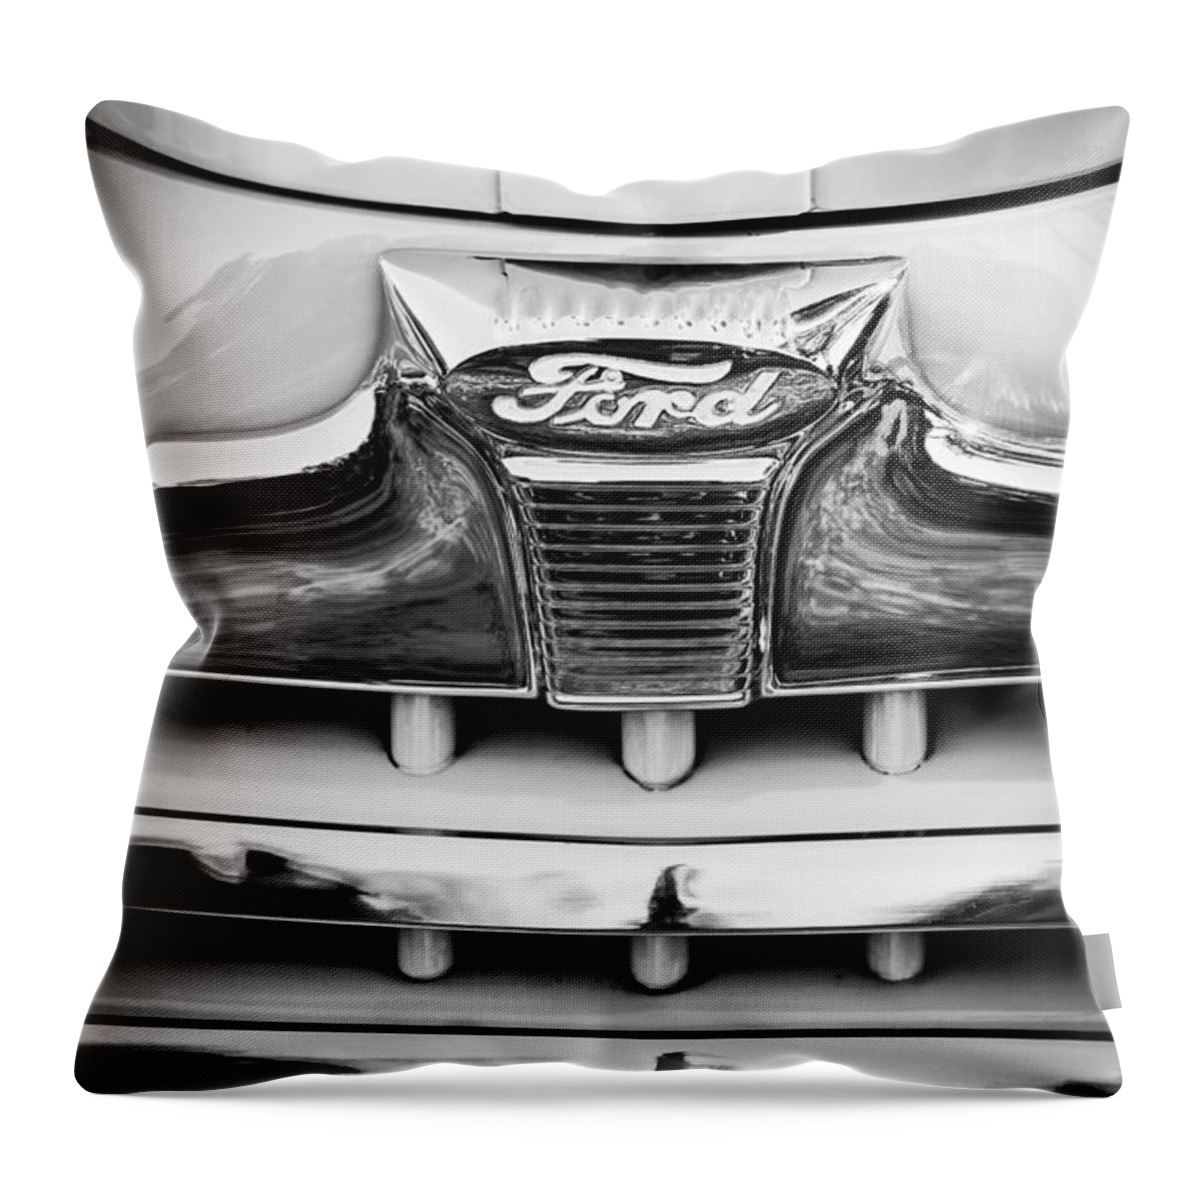 1947 Ford Deluxe Grill Ornament Throw Pillow featuring the photograph 1947 Ford Deluxe Grill Ornament -0700bw by Jill Reger